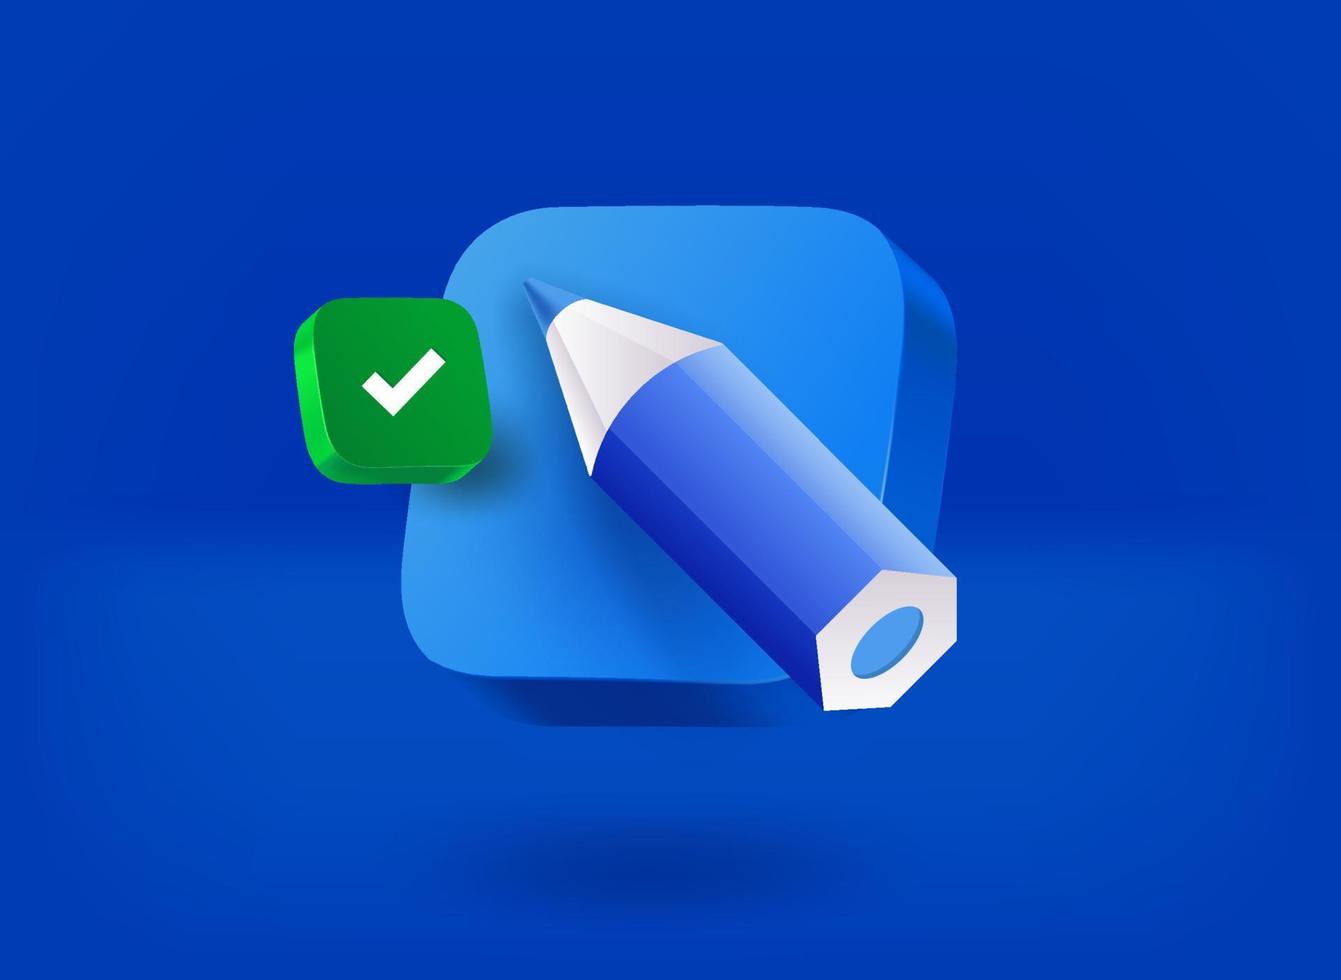 Pencil icon with checkmark pictogram. 3d vector illustration